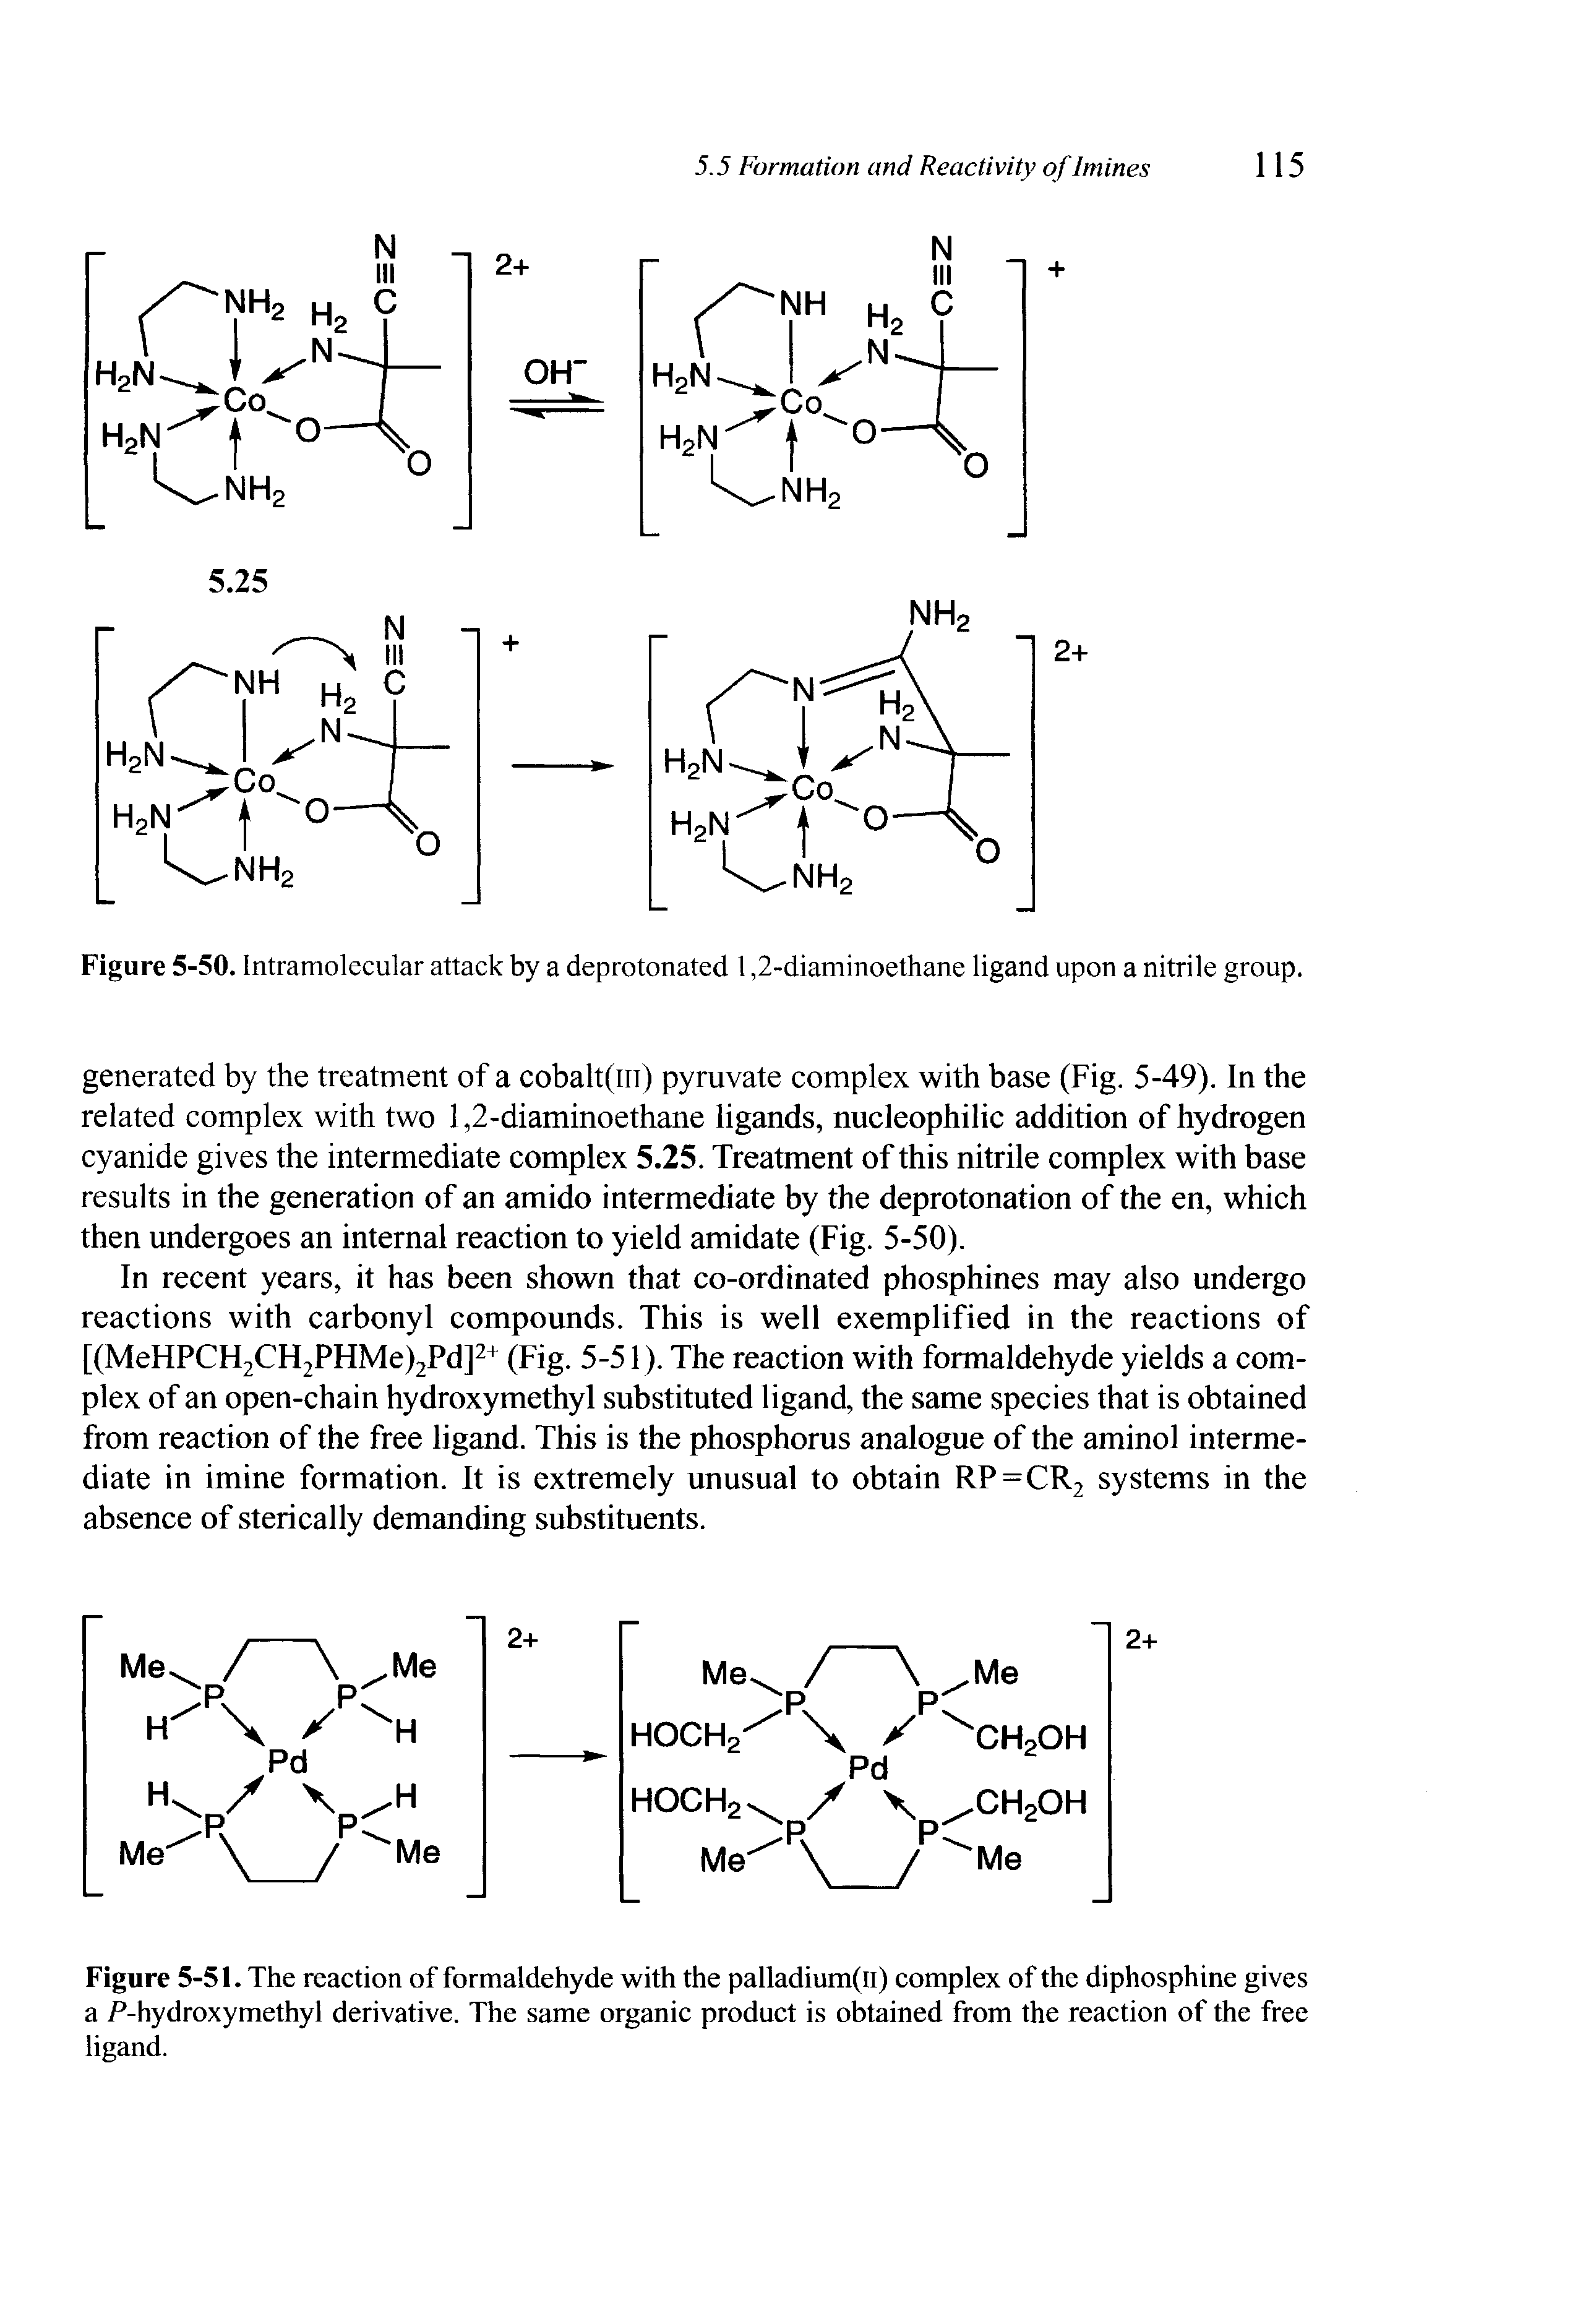 Figure 5-51. The reaction of formaldehyde with the palladium(li) complex of the diphosphine gives a / -hydroxymethyl derivative. The same organic product is obtained from the reaction of the free ligand.